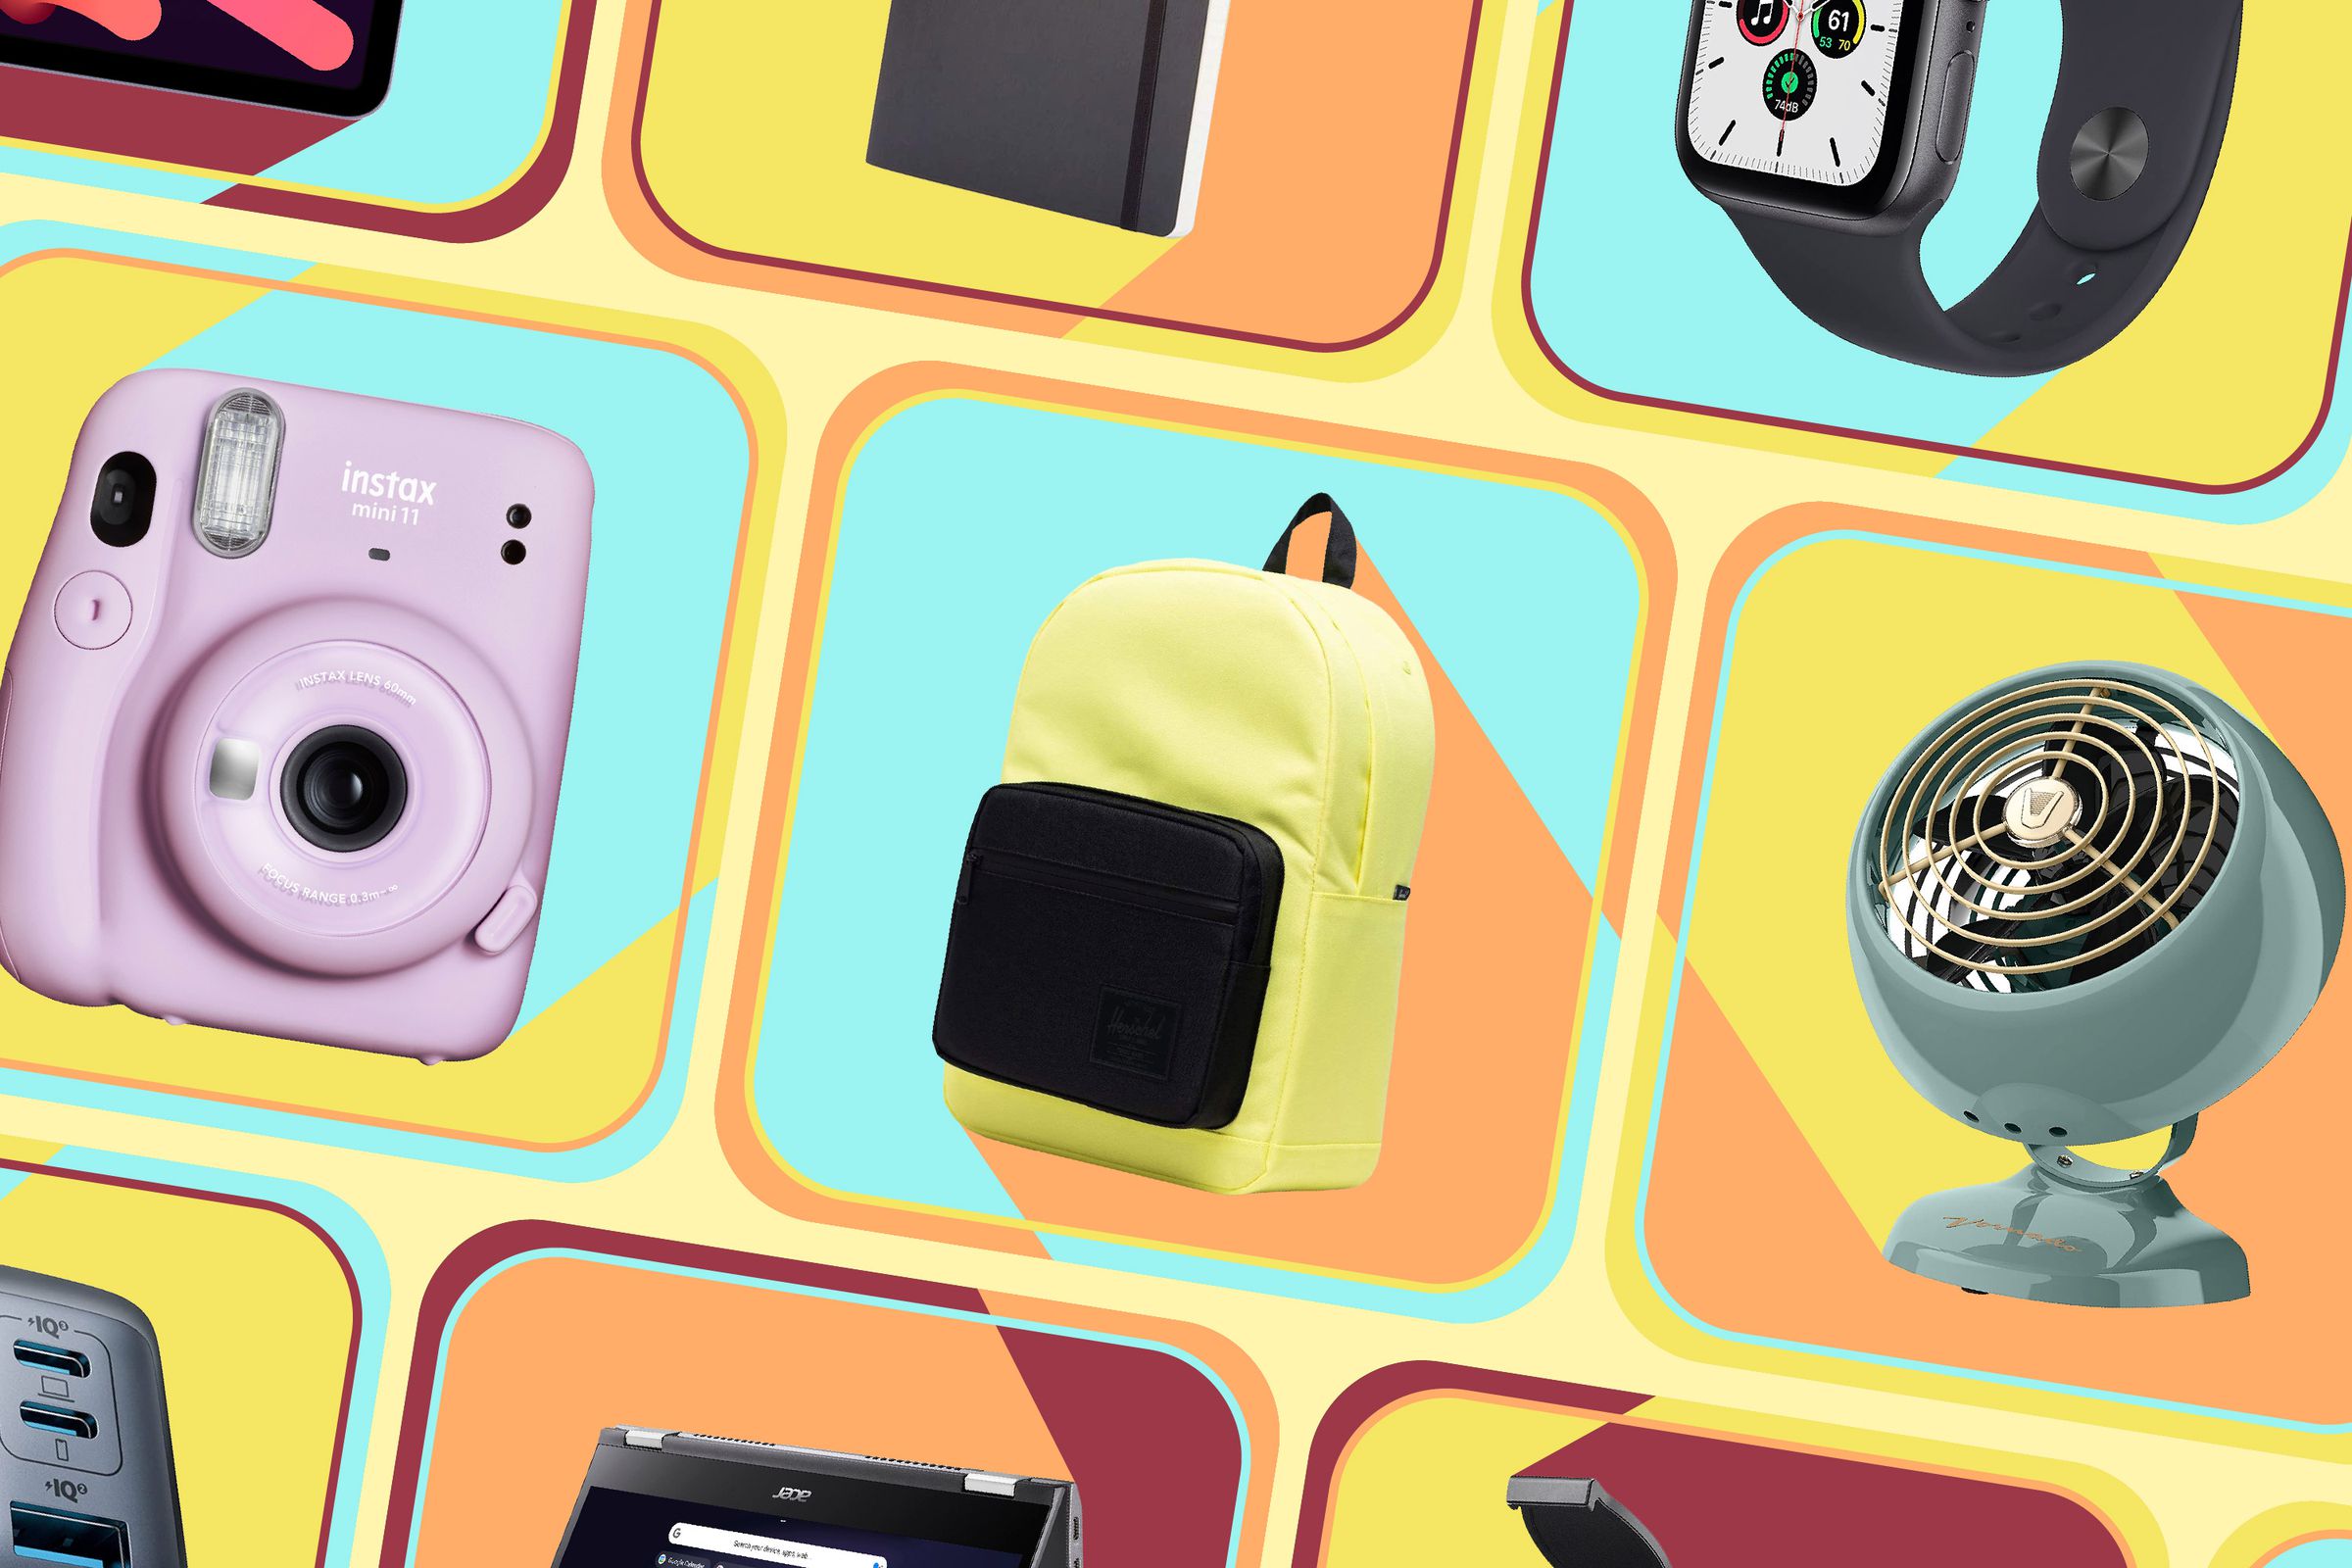 All the best backpacks, laptops, tablets, and wearables for the new school year.